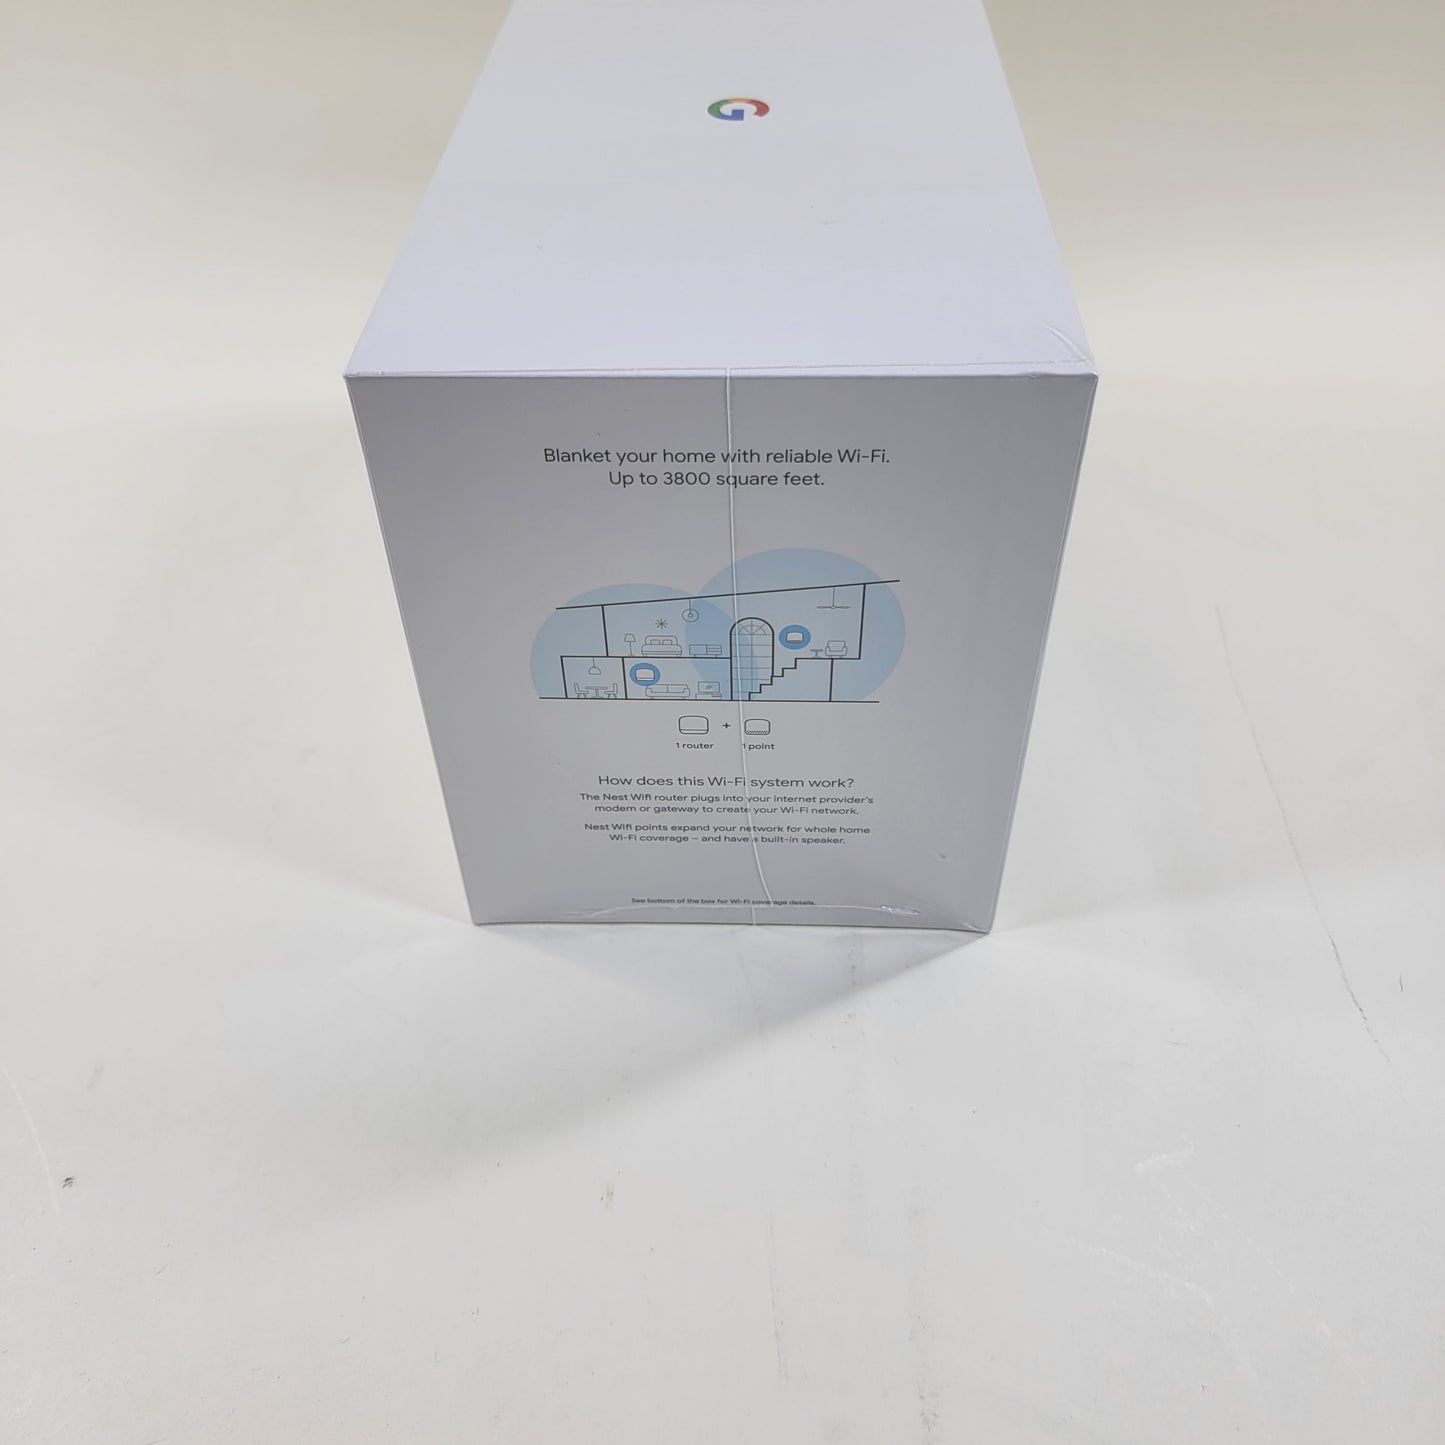 New Google Nest WiFi Router and Point Dual Band GA00595-US 2.4GHz/5Ghz